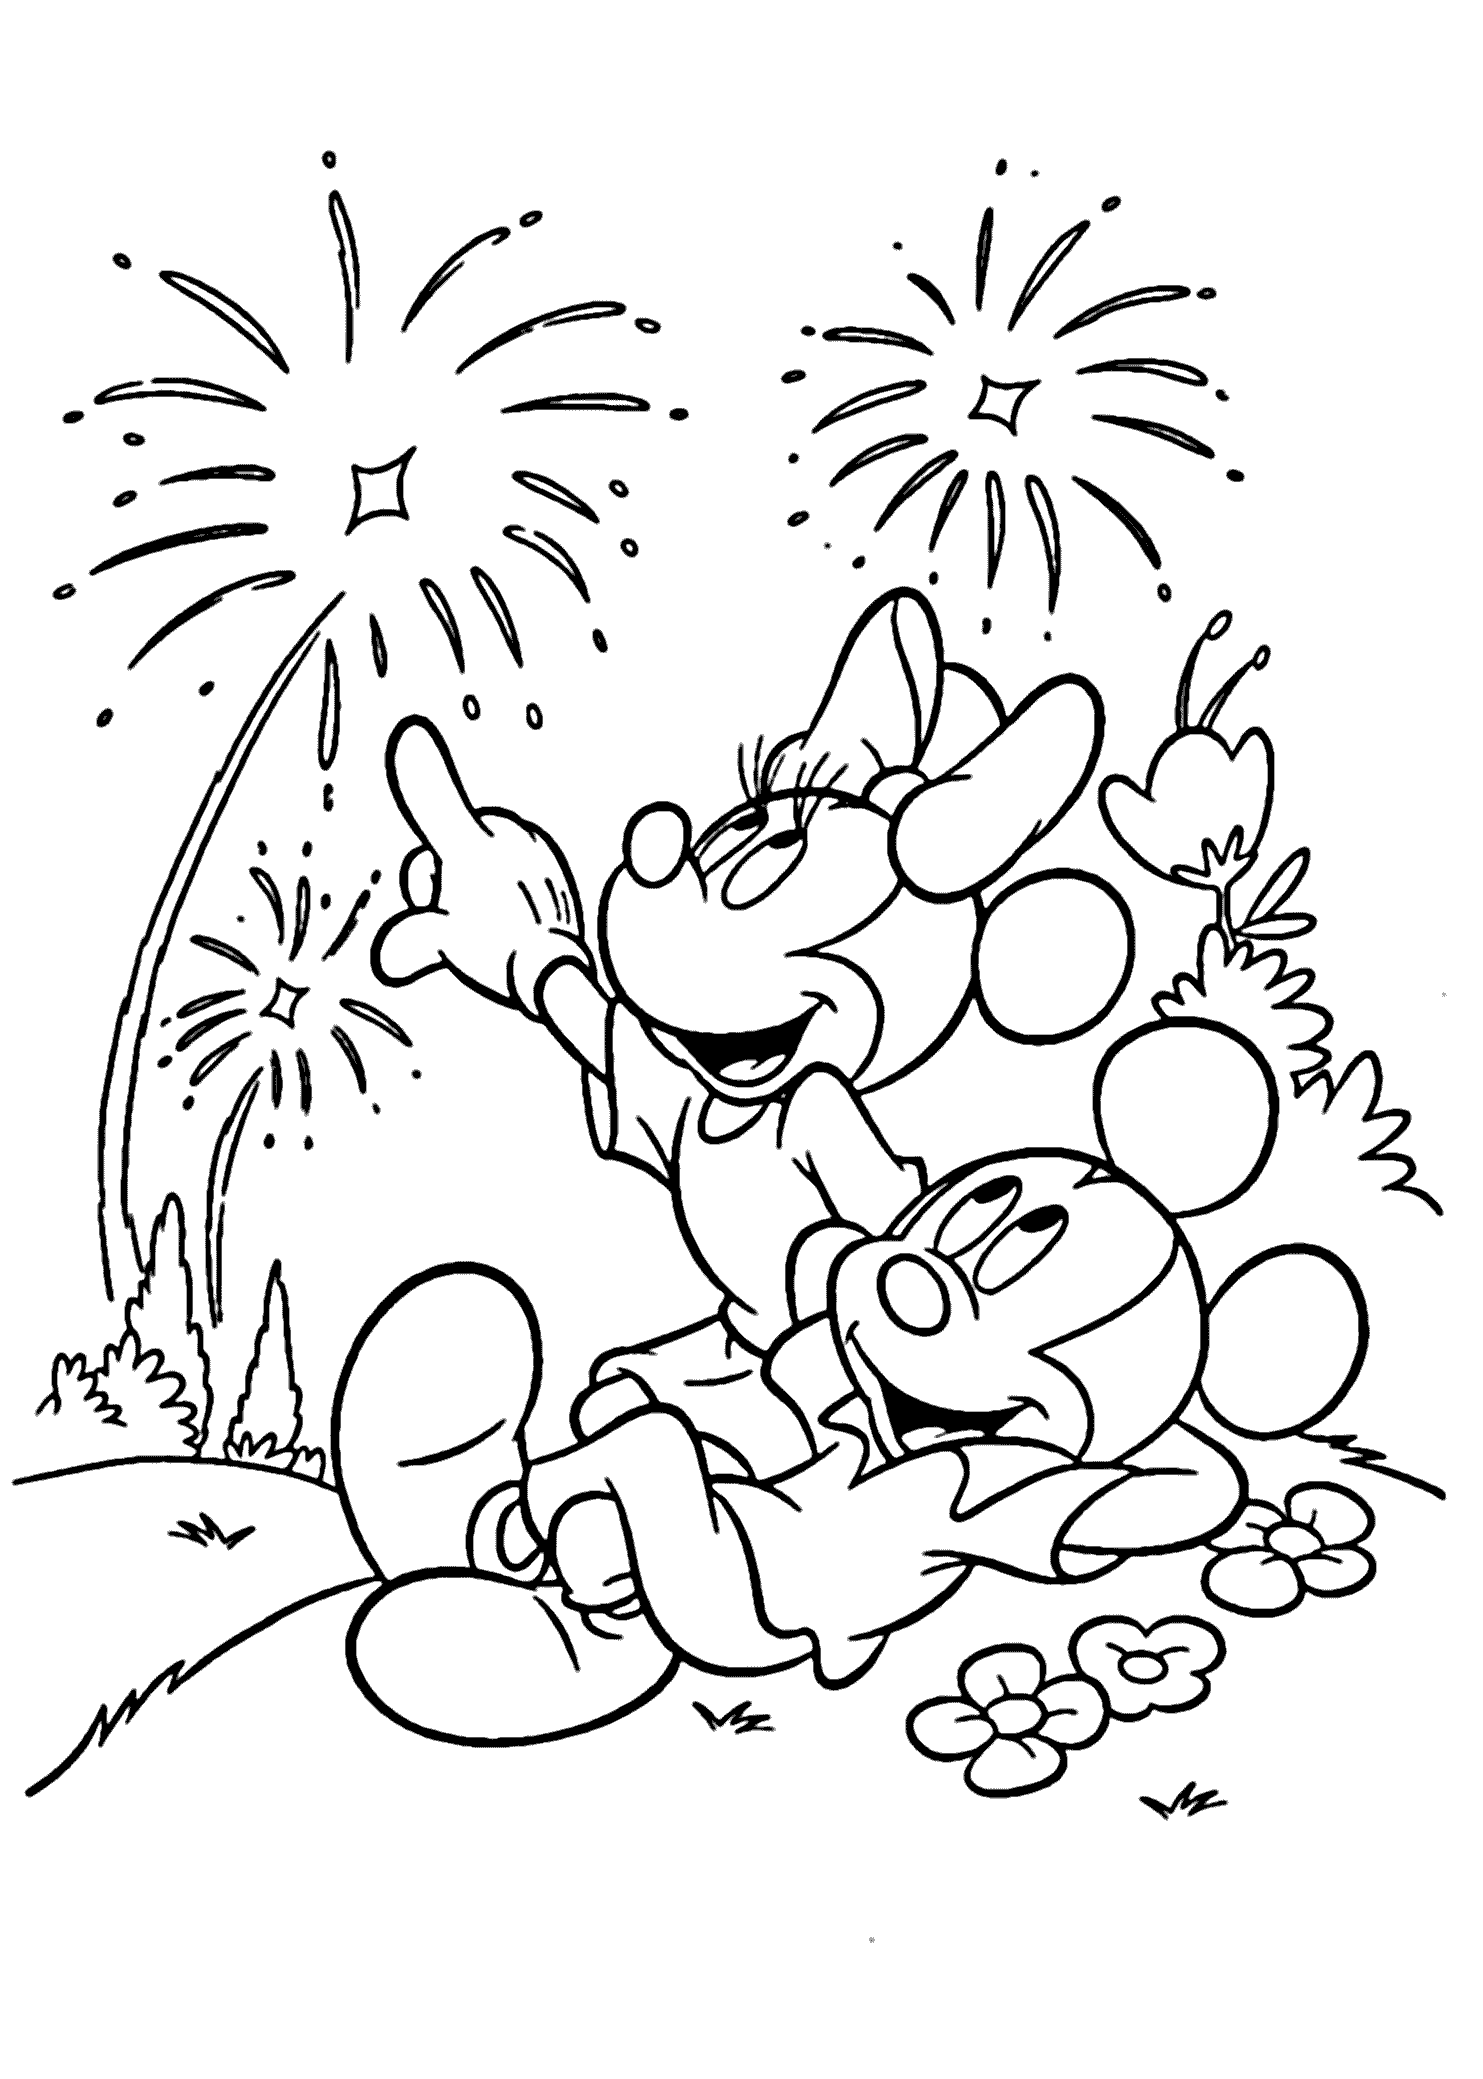 Mickey Mouse Coloring Pages Cartoons 4th of July Mickey and Minnie Printable 2020 4054 Coloring4free